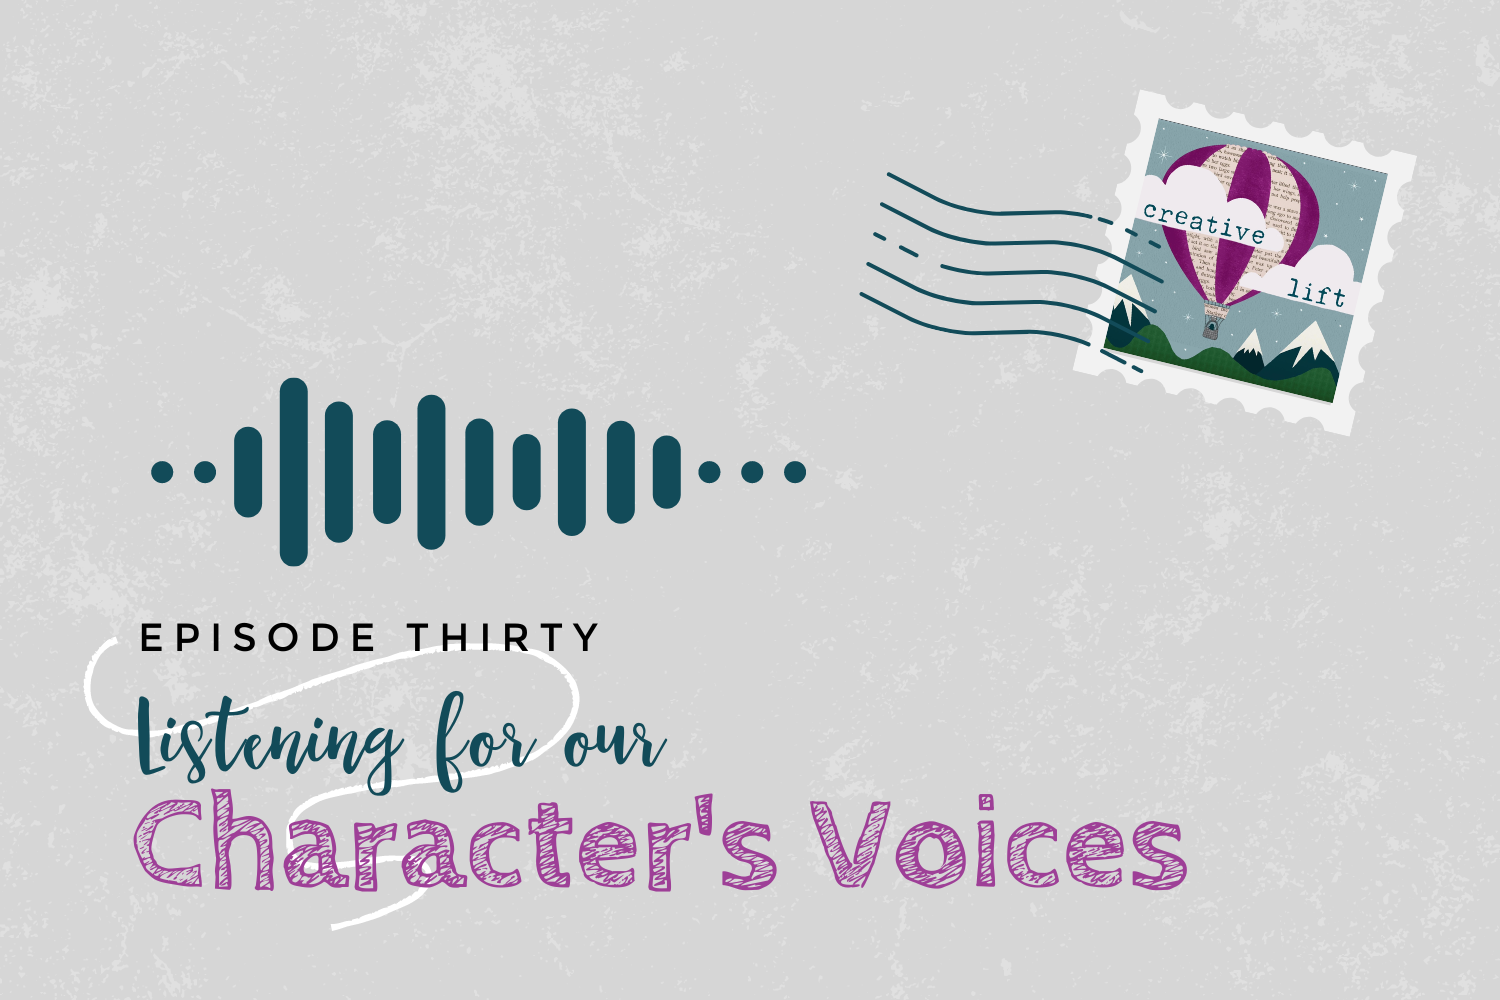 Creative Lift Episode 30- Listening for Our Character's Voices